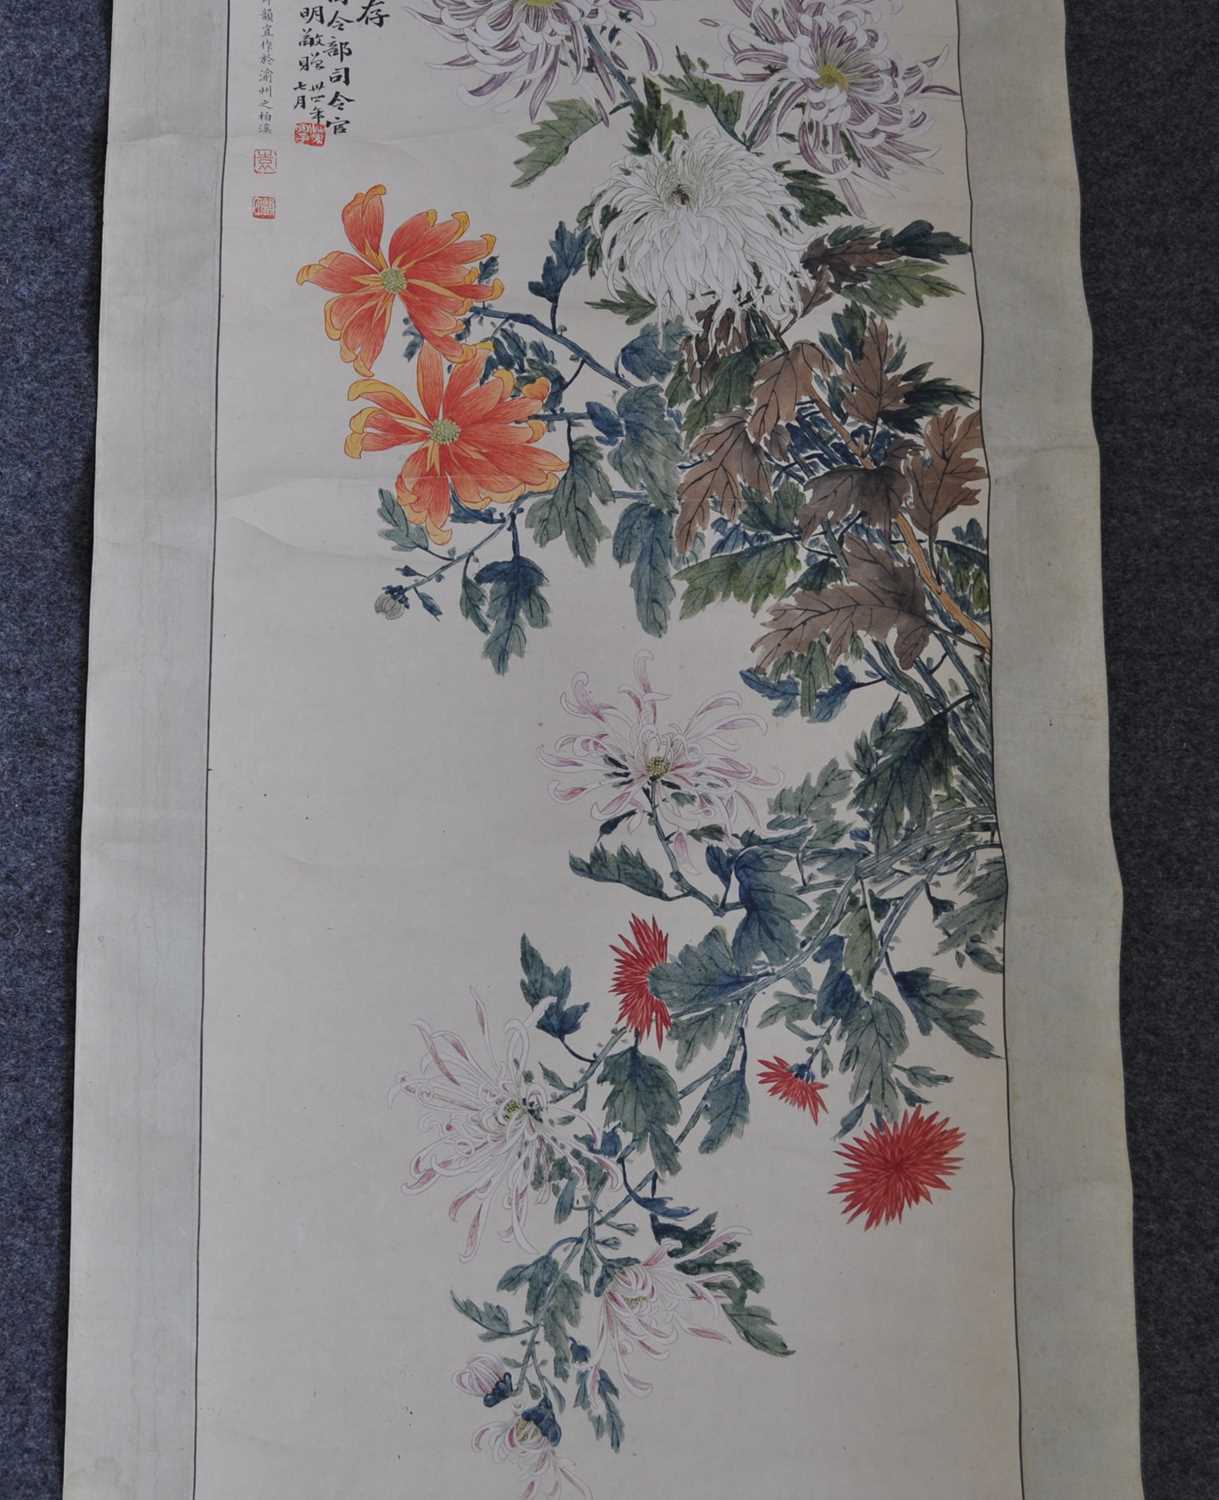 Yuan Yunyi (袁韻宜) (1920-2004) - Chrysanthemums, Republic of China scroll painting dated 1944, ink - Image 11 of 31